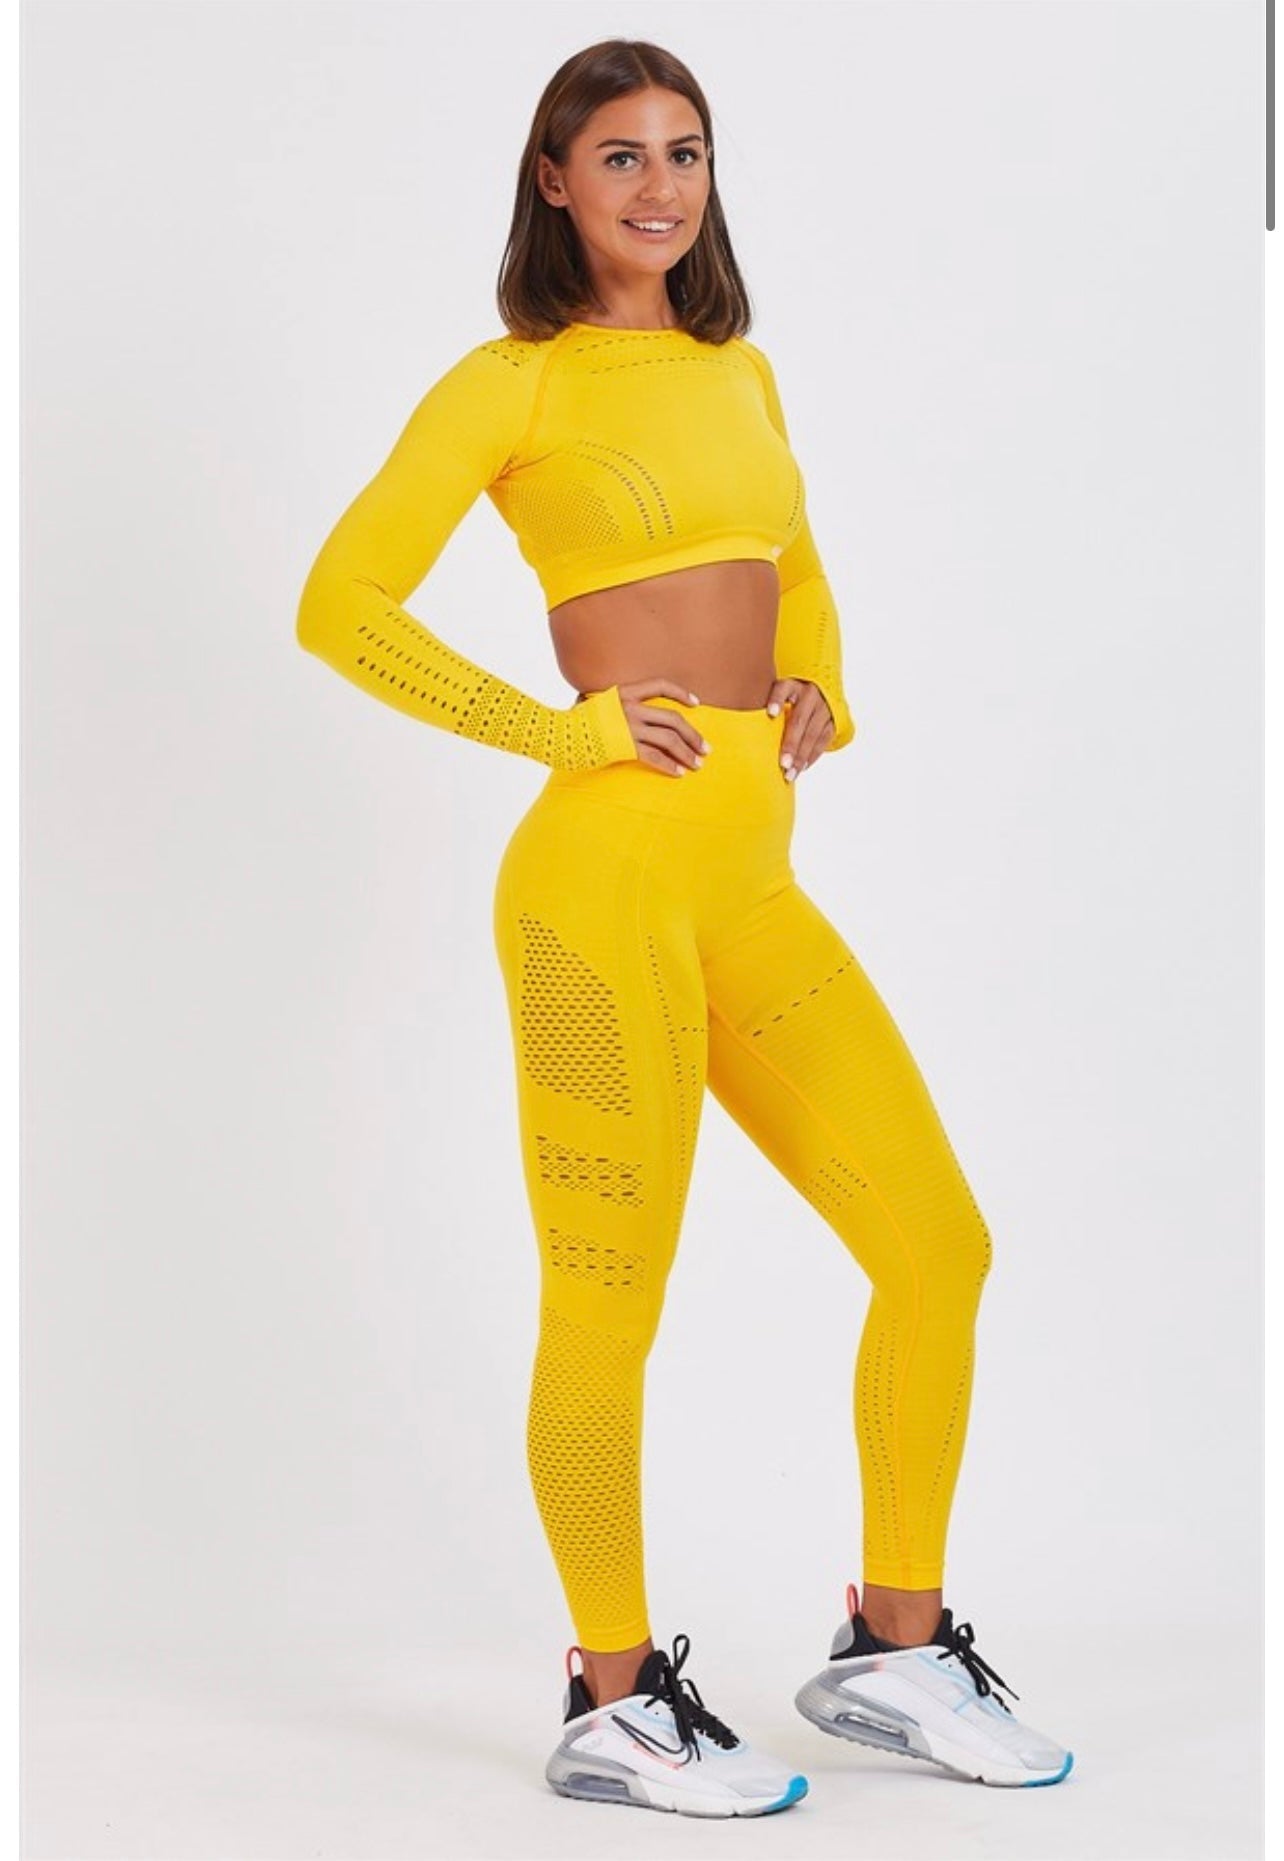 Womens Active Yoga Set With Bra, Bulift Pocket, And Leggings Sportswear Set  For Gym And Workout C161/C162 From Managuazi, $27.74